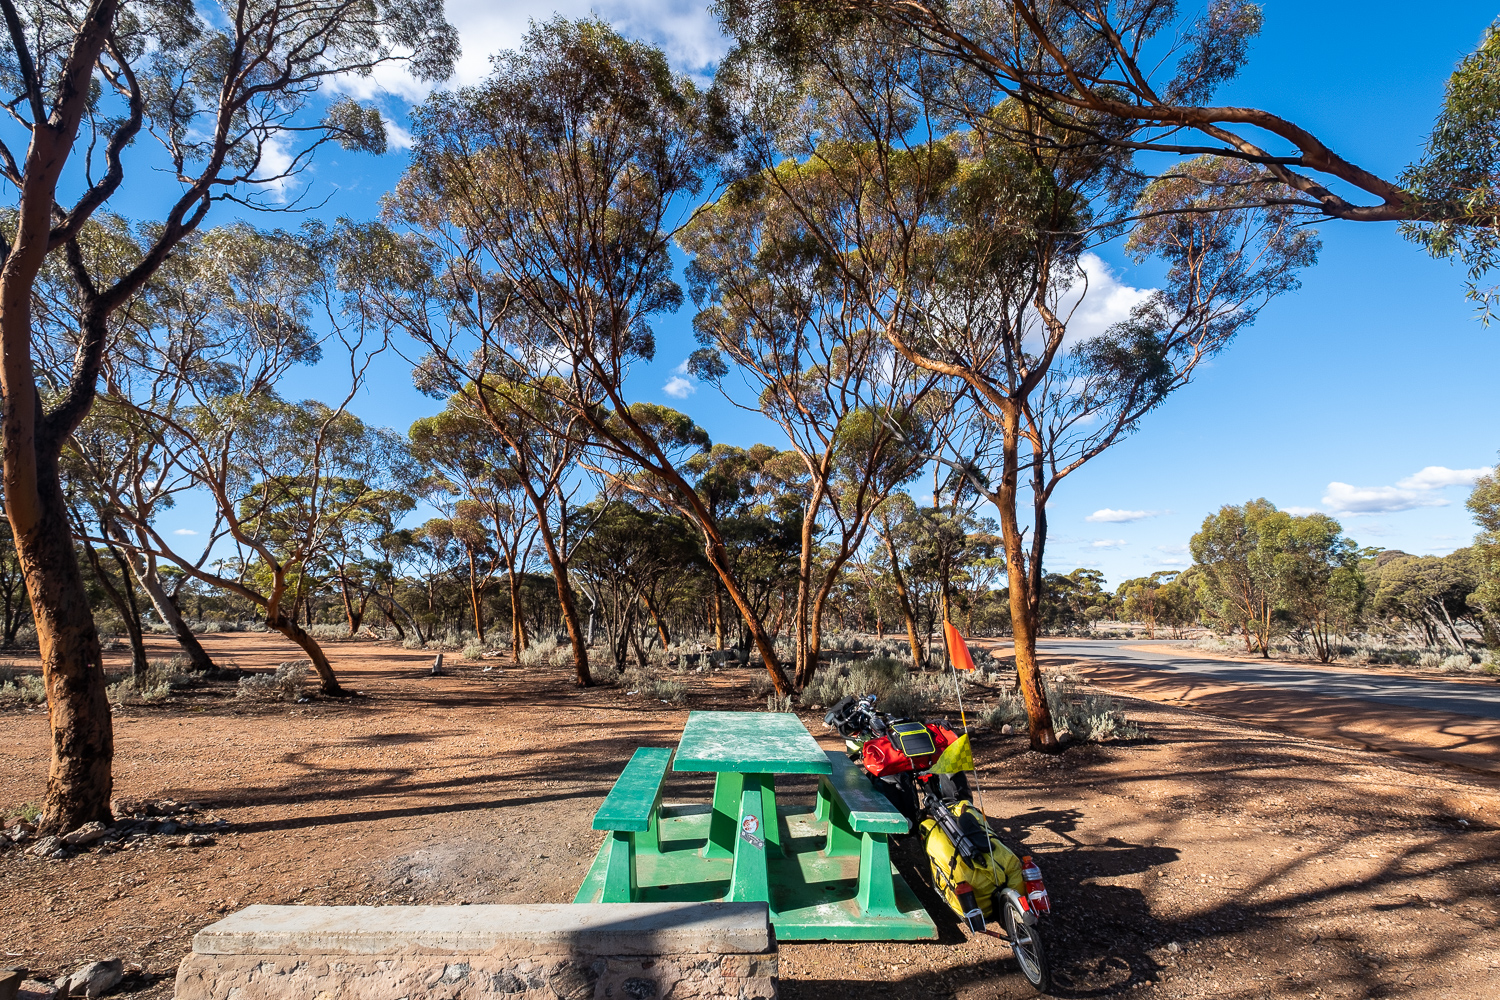  I love finding tables and benches out in nature, especially when it's time for lunch or I need to stretch my body. It's the perfect spot to take a break, enjoy a meal, and get some movement in. Being surrounded by the beauty of nature just adds to t